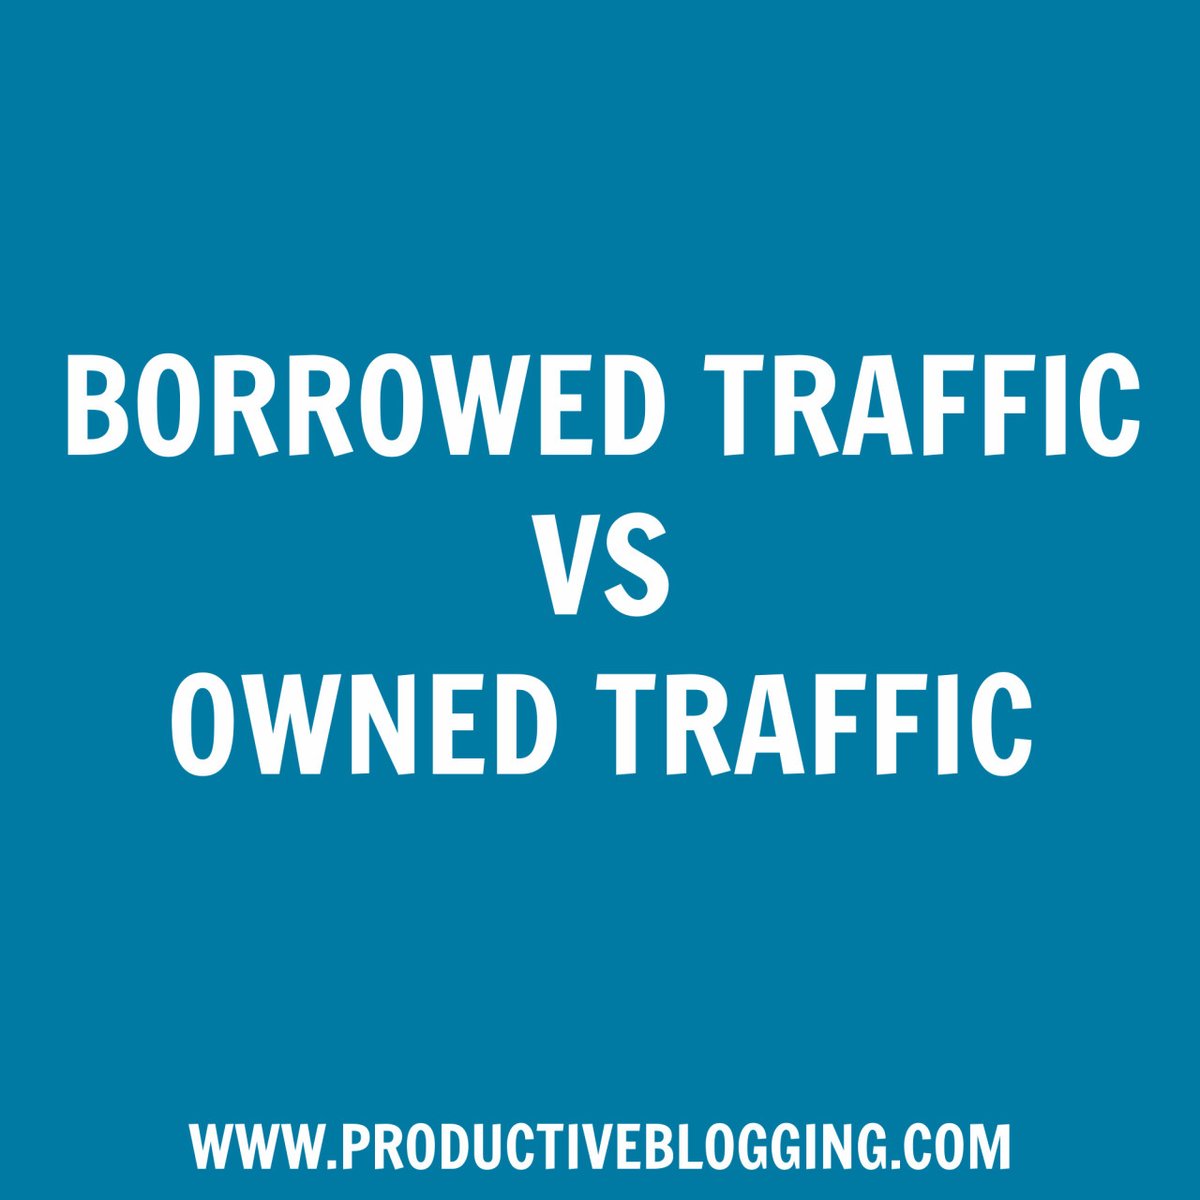 No matter where you get your traffic from, be it Google, Pinterest, social media or YouTube, the fundamental problem is that this traffic is 'borrowed' traffic. Fortunately, there's a very easy way to convert 'borrowed' traffic into 'owned' traffic >>> bit.ly/3fS0ogS